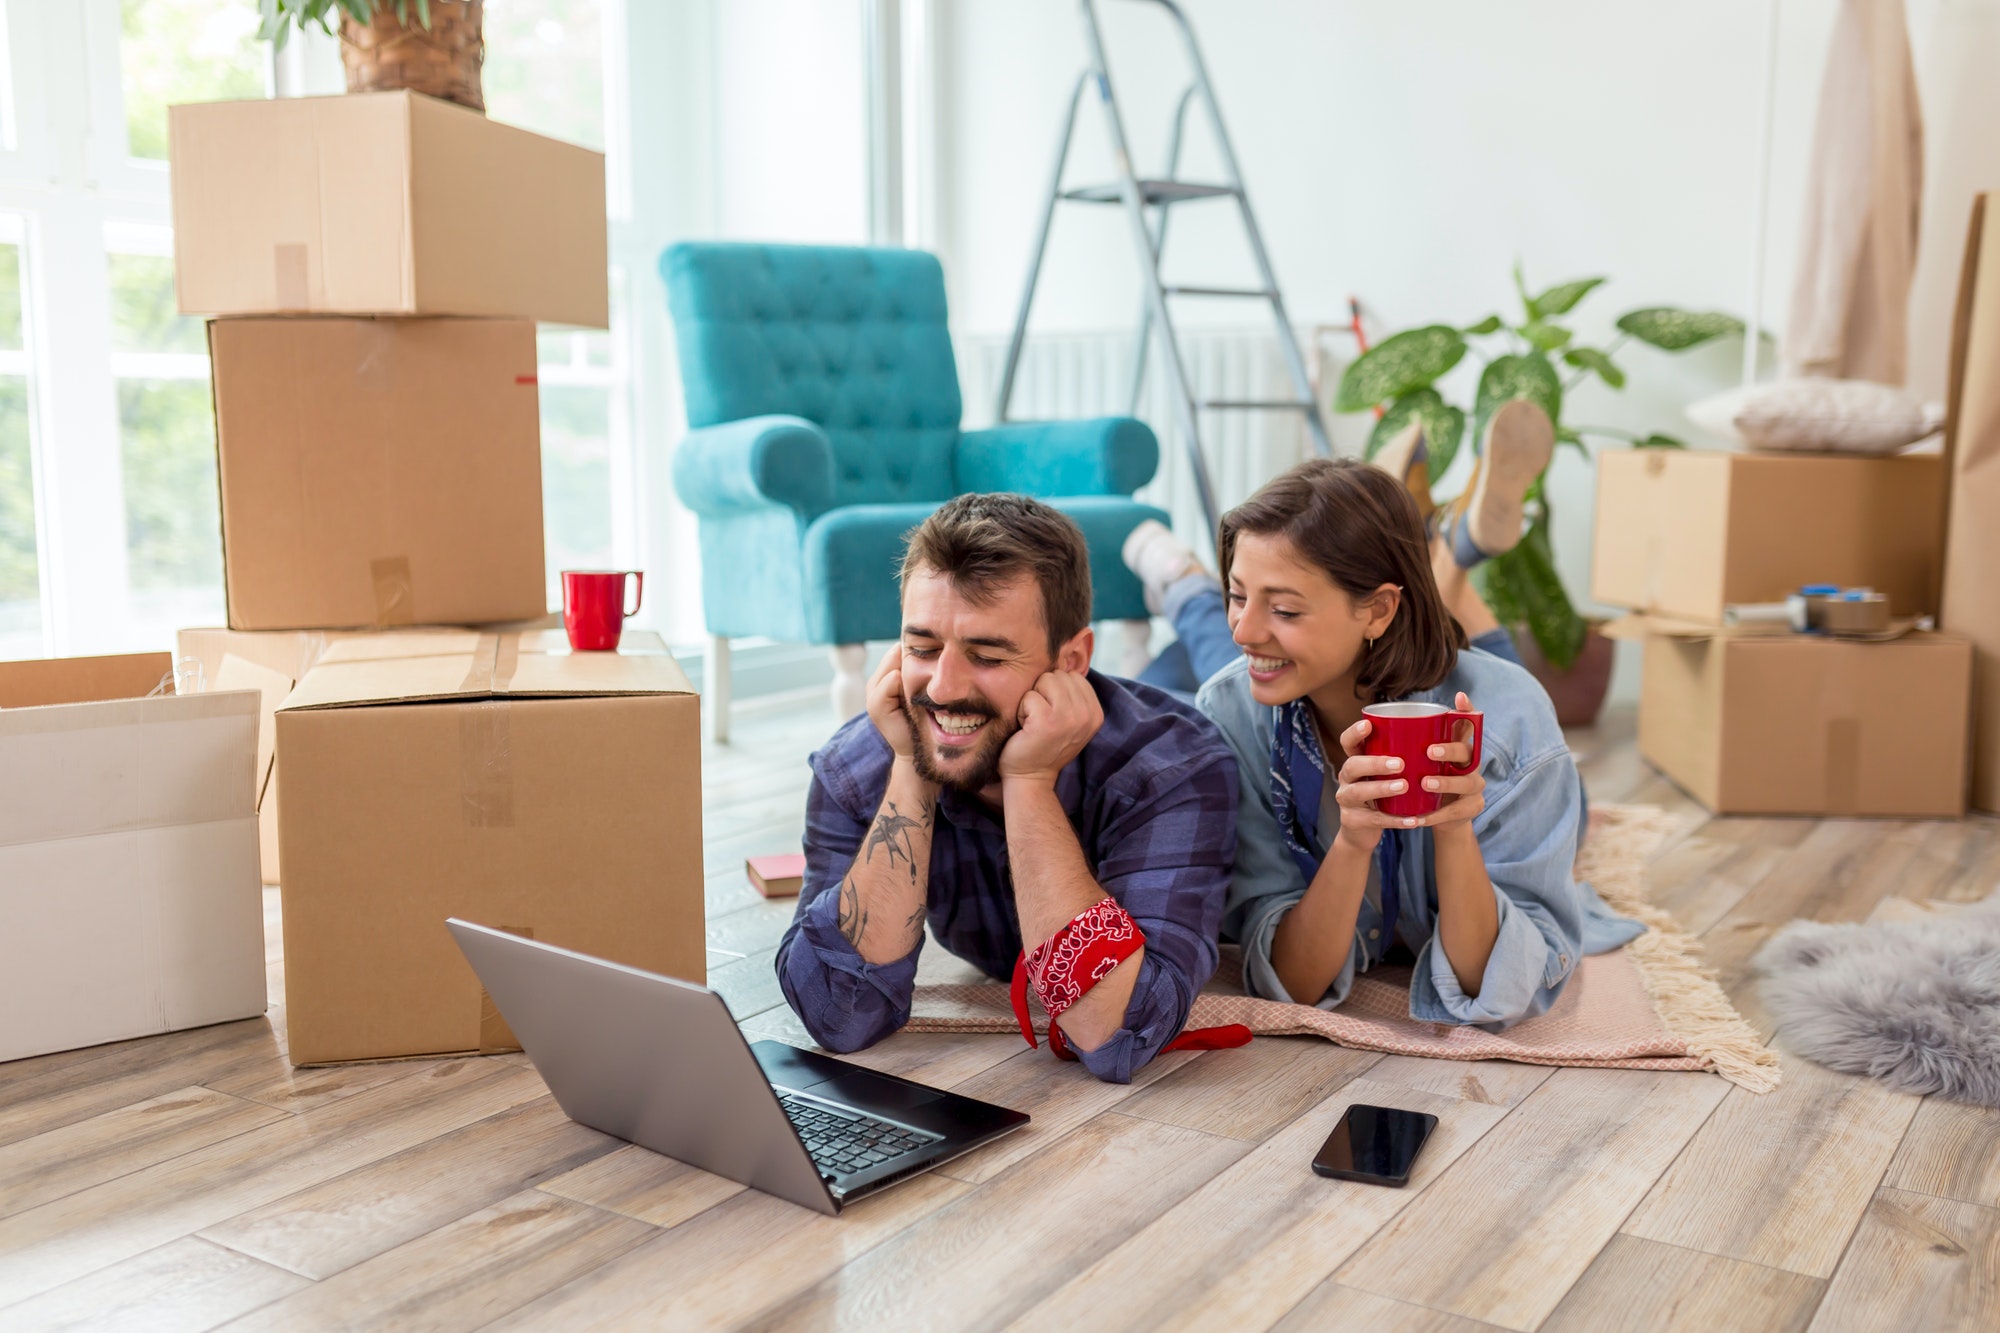 Couple searching the Web for apartment redecoration ideas while moving in together